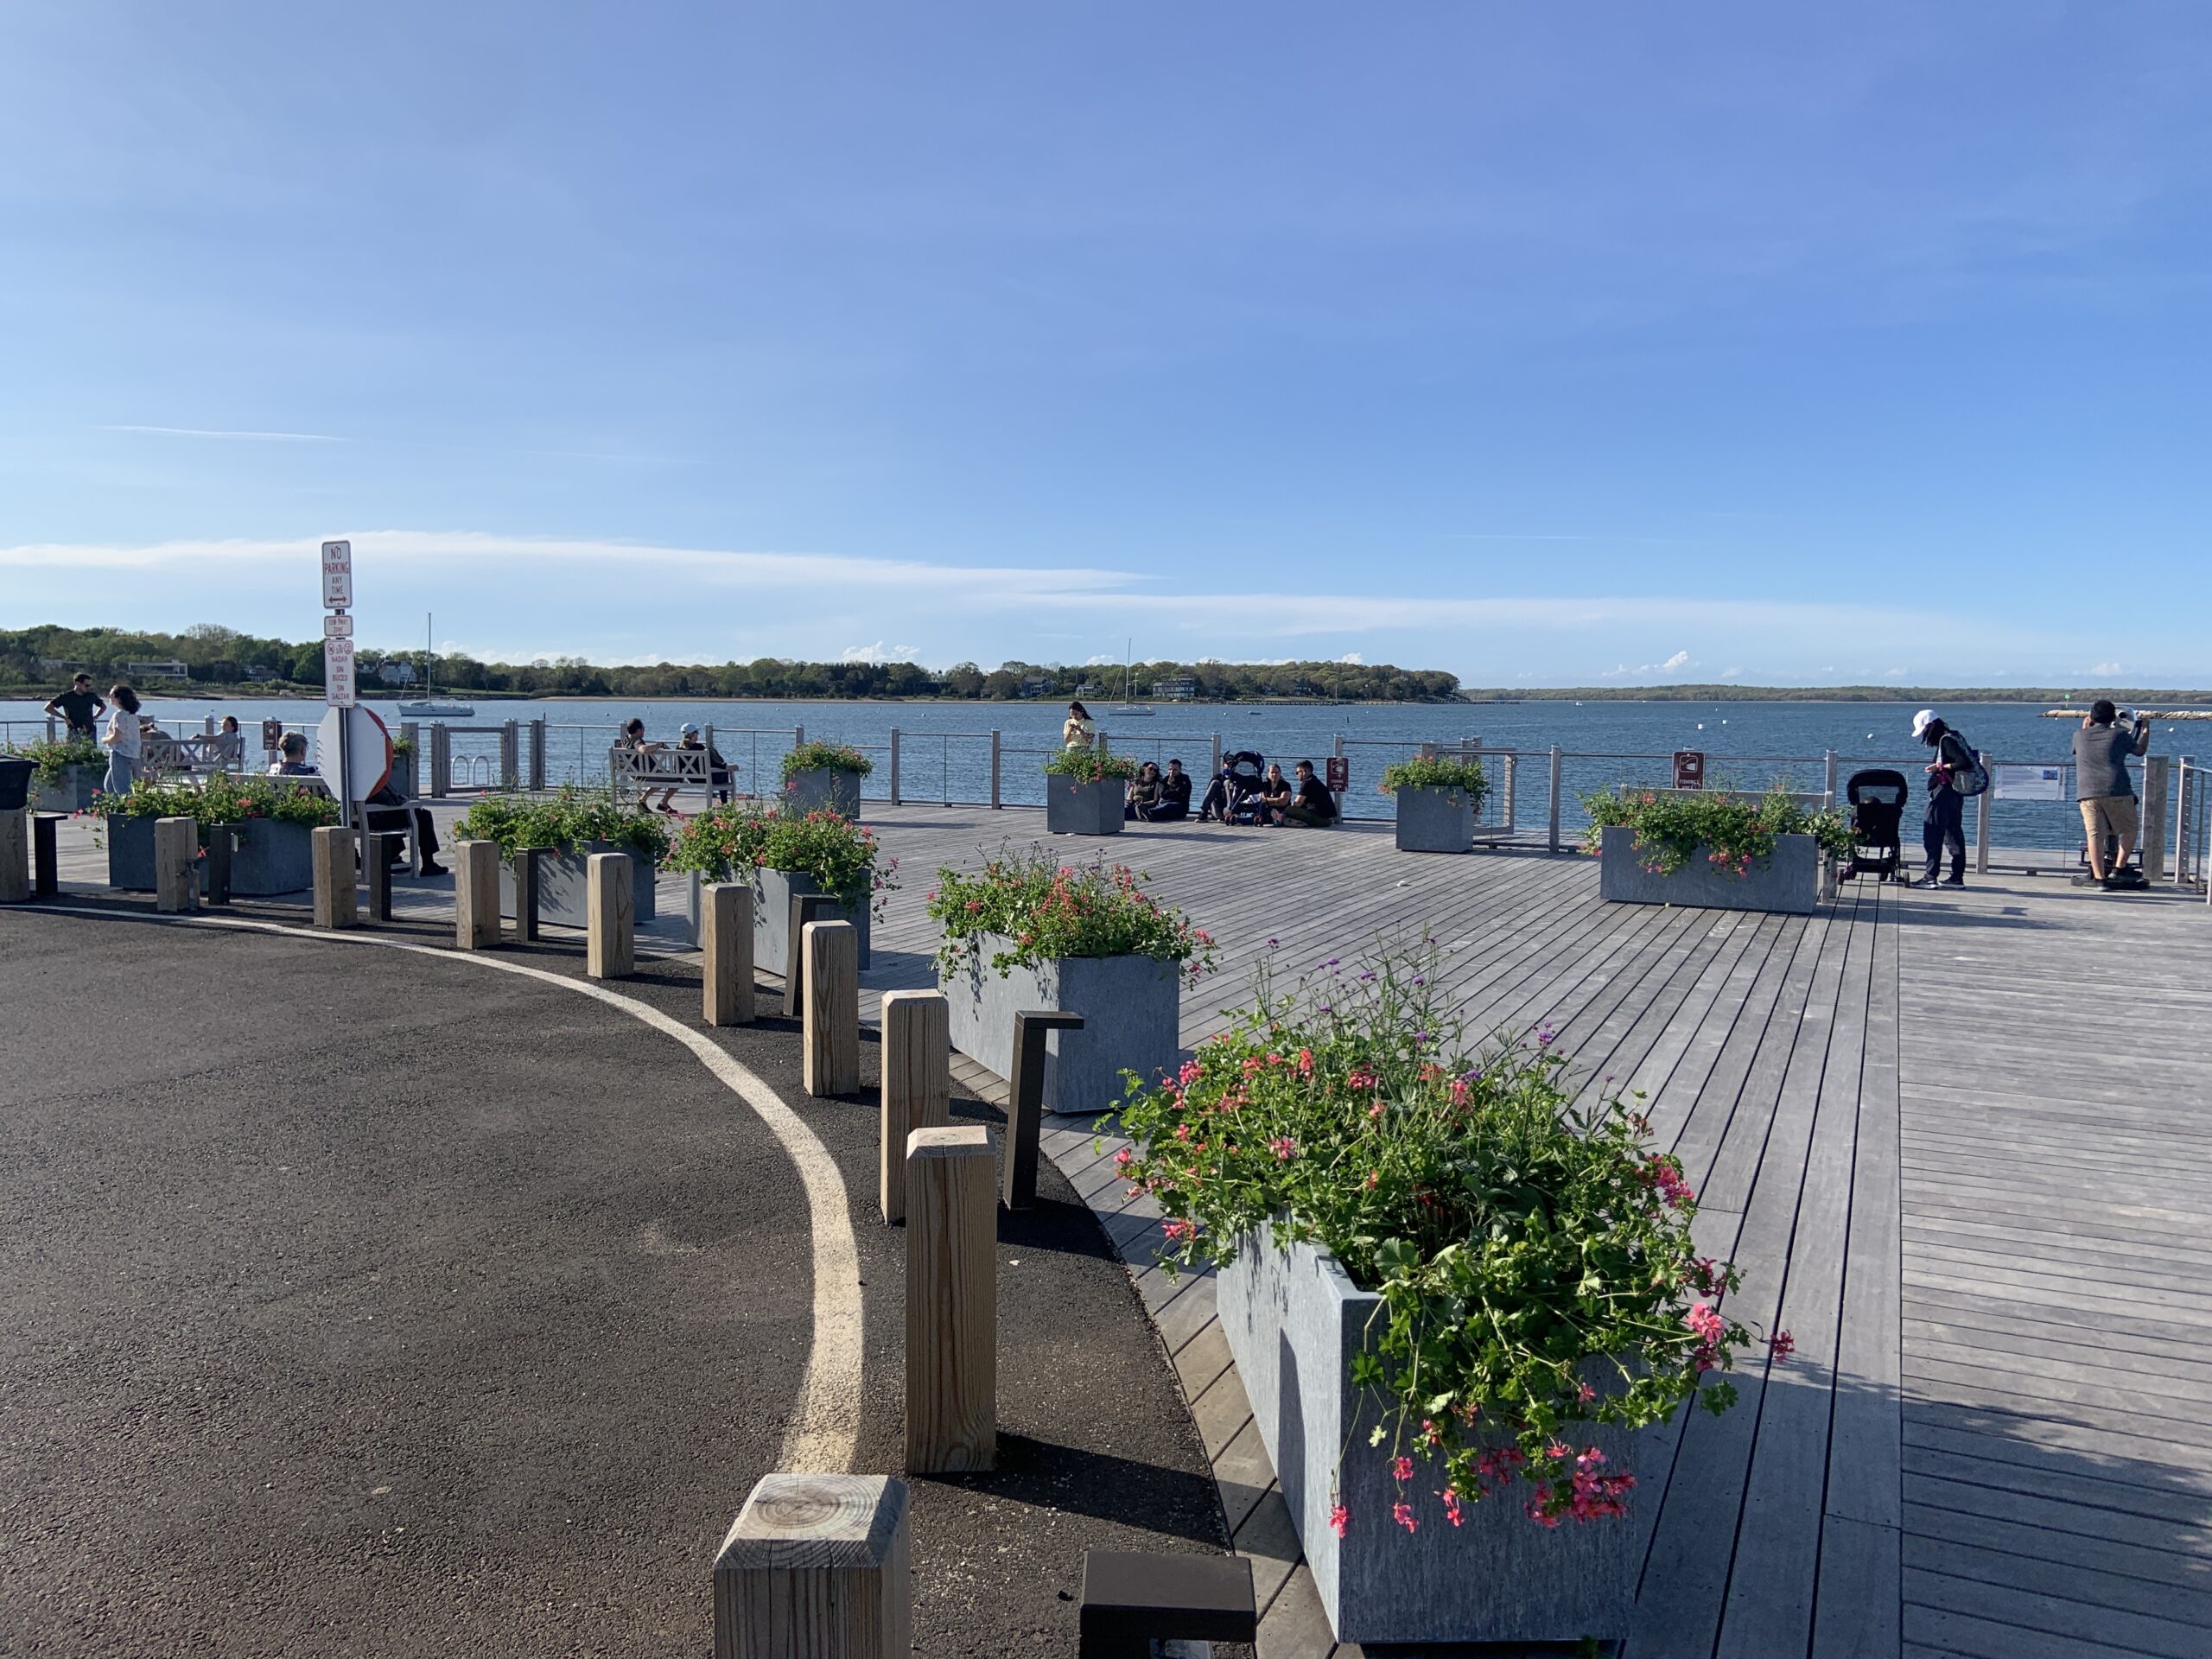 As part of a $4 million restoration of Long Wharf, the end of the municipal pier has been set aside for pedestrian use, with benches and planters. STEPHEN J. KOTZ